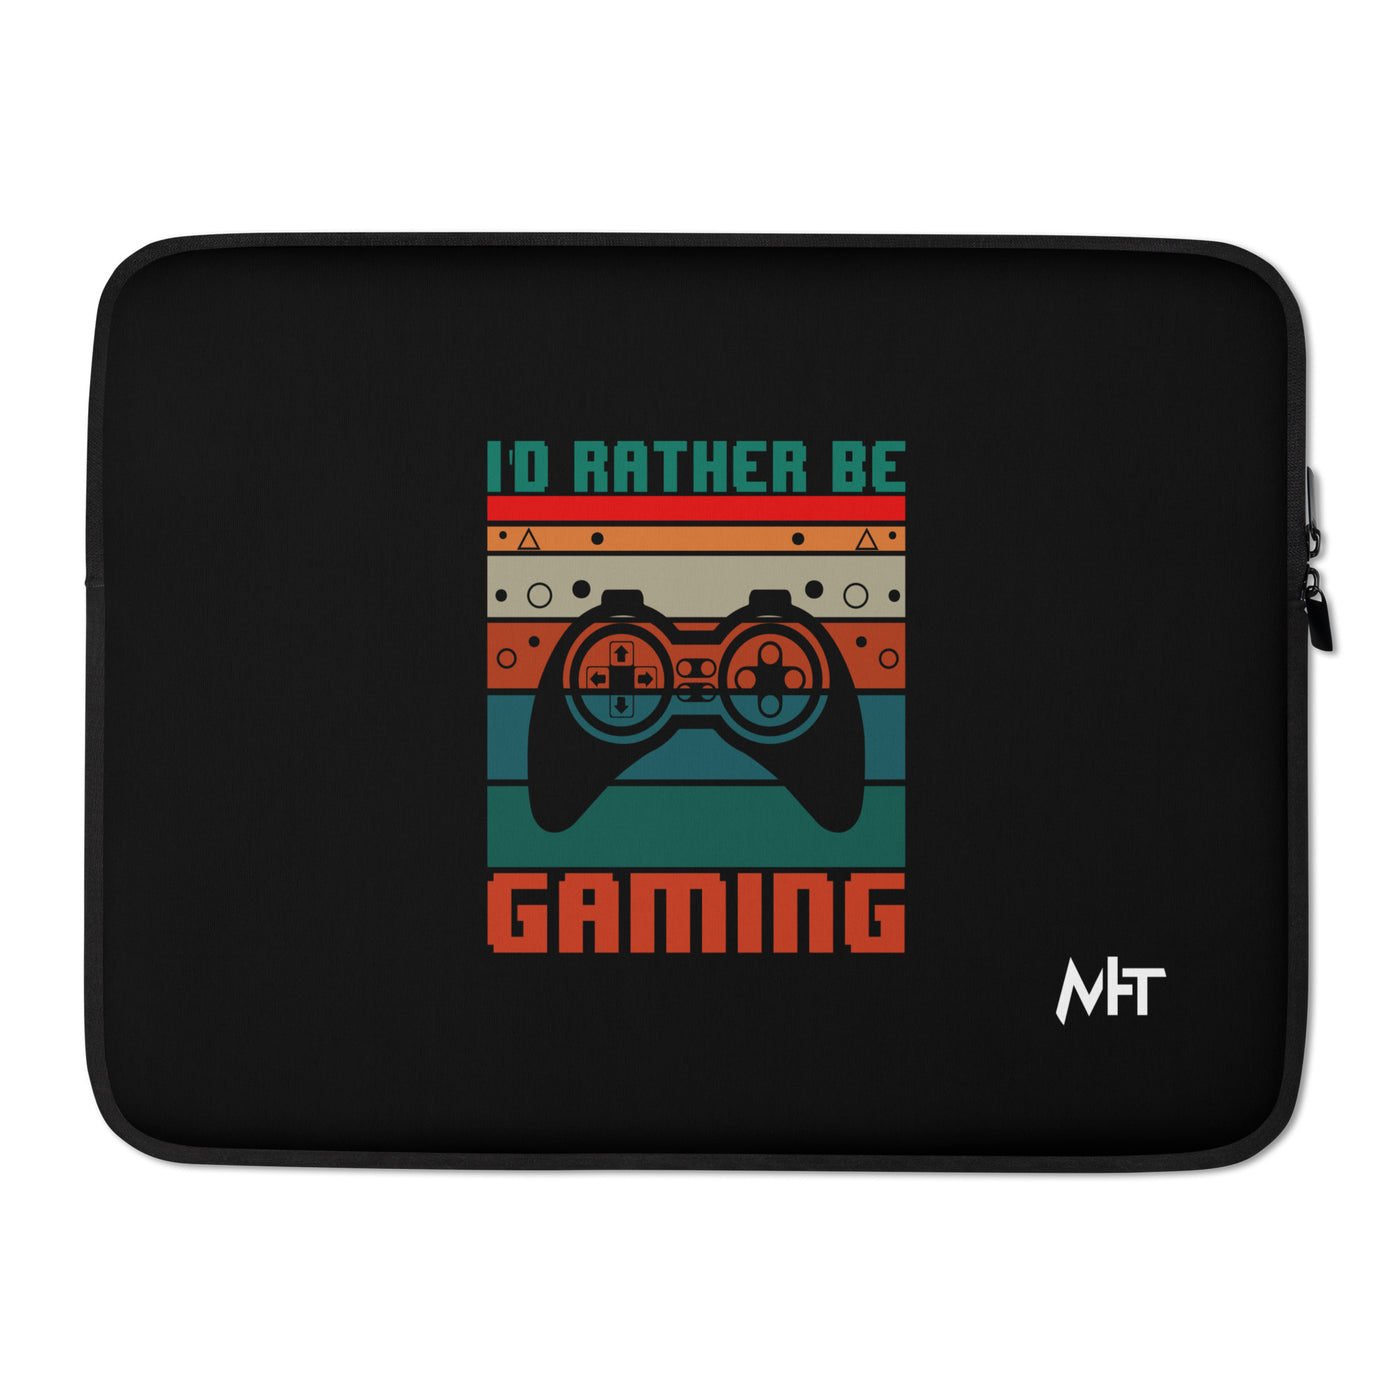 I'd rather be Gaming - Laptop Sleeve